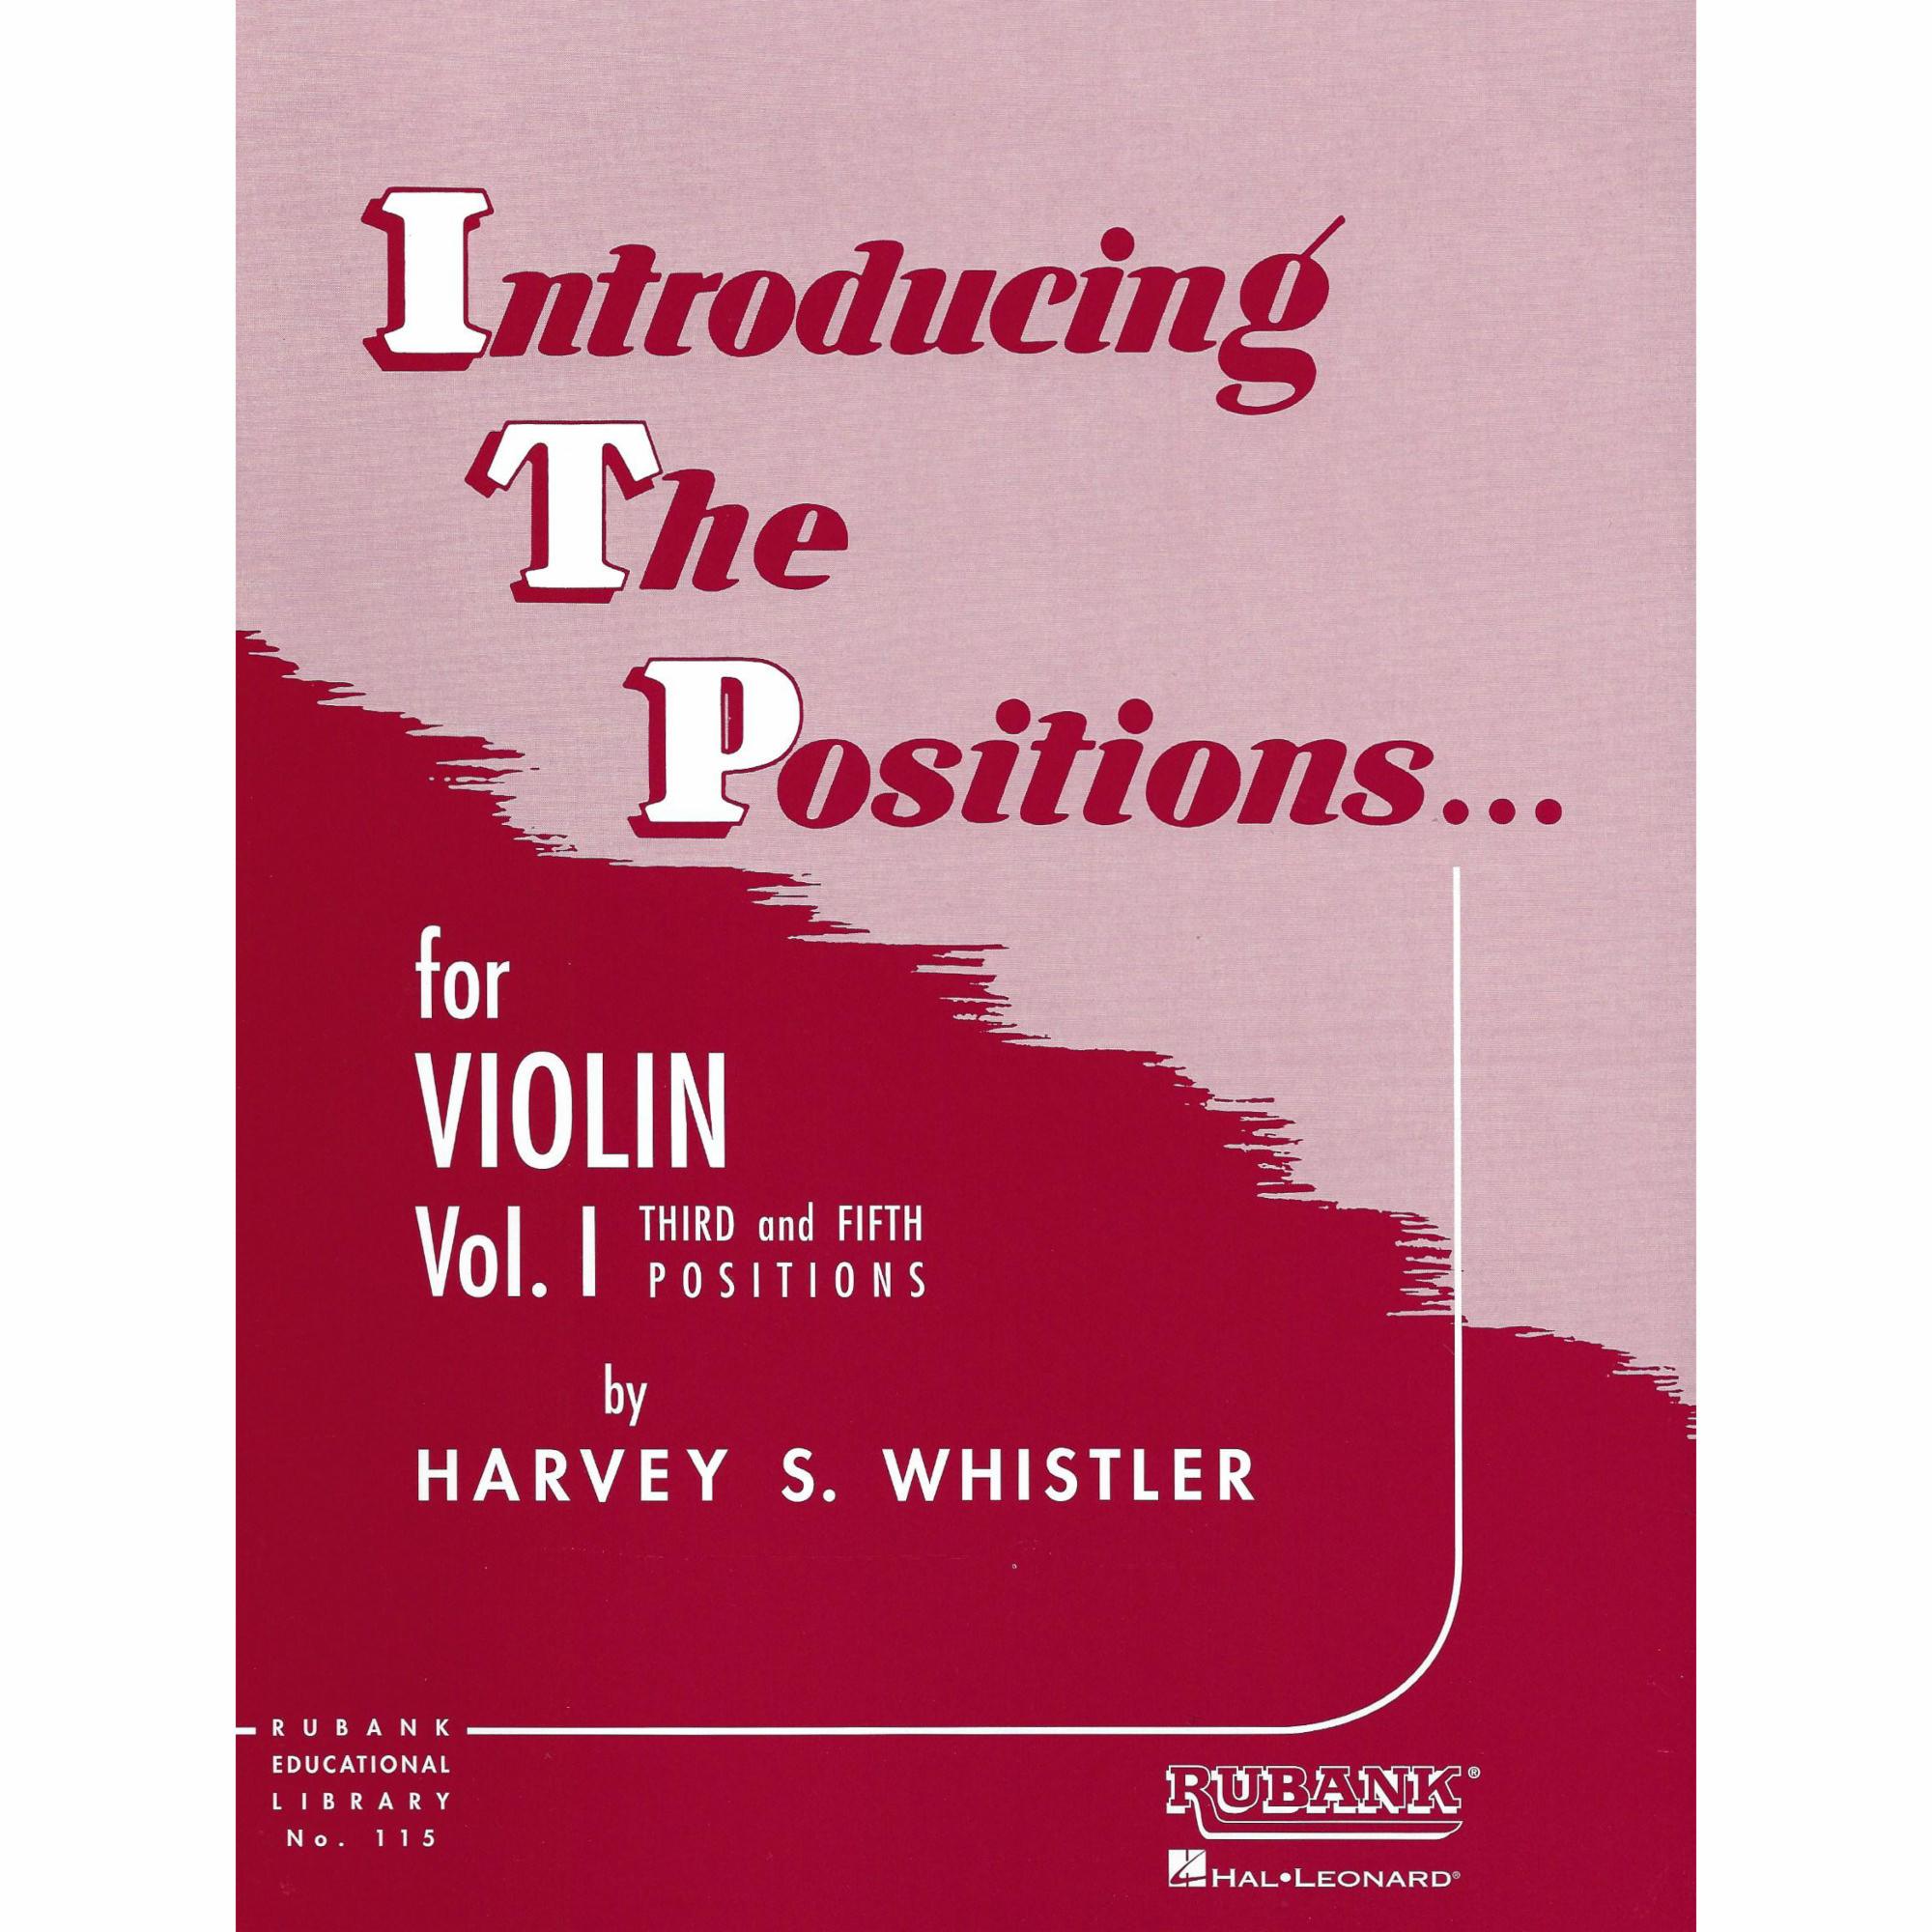 Introducing the Positions for Violin, Vols. I-II